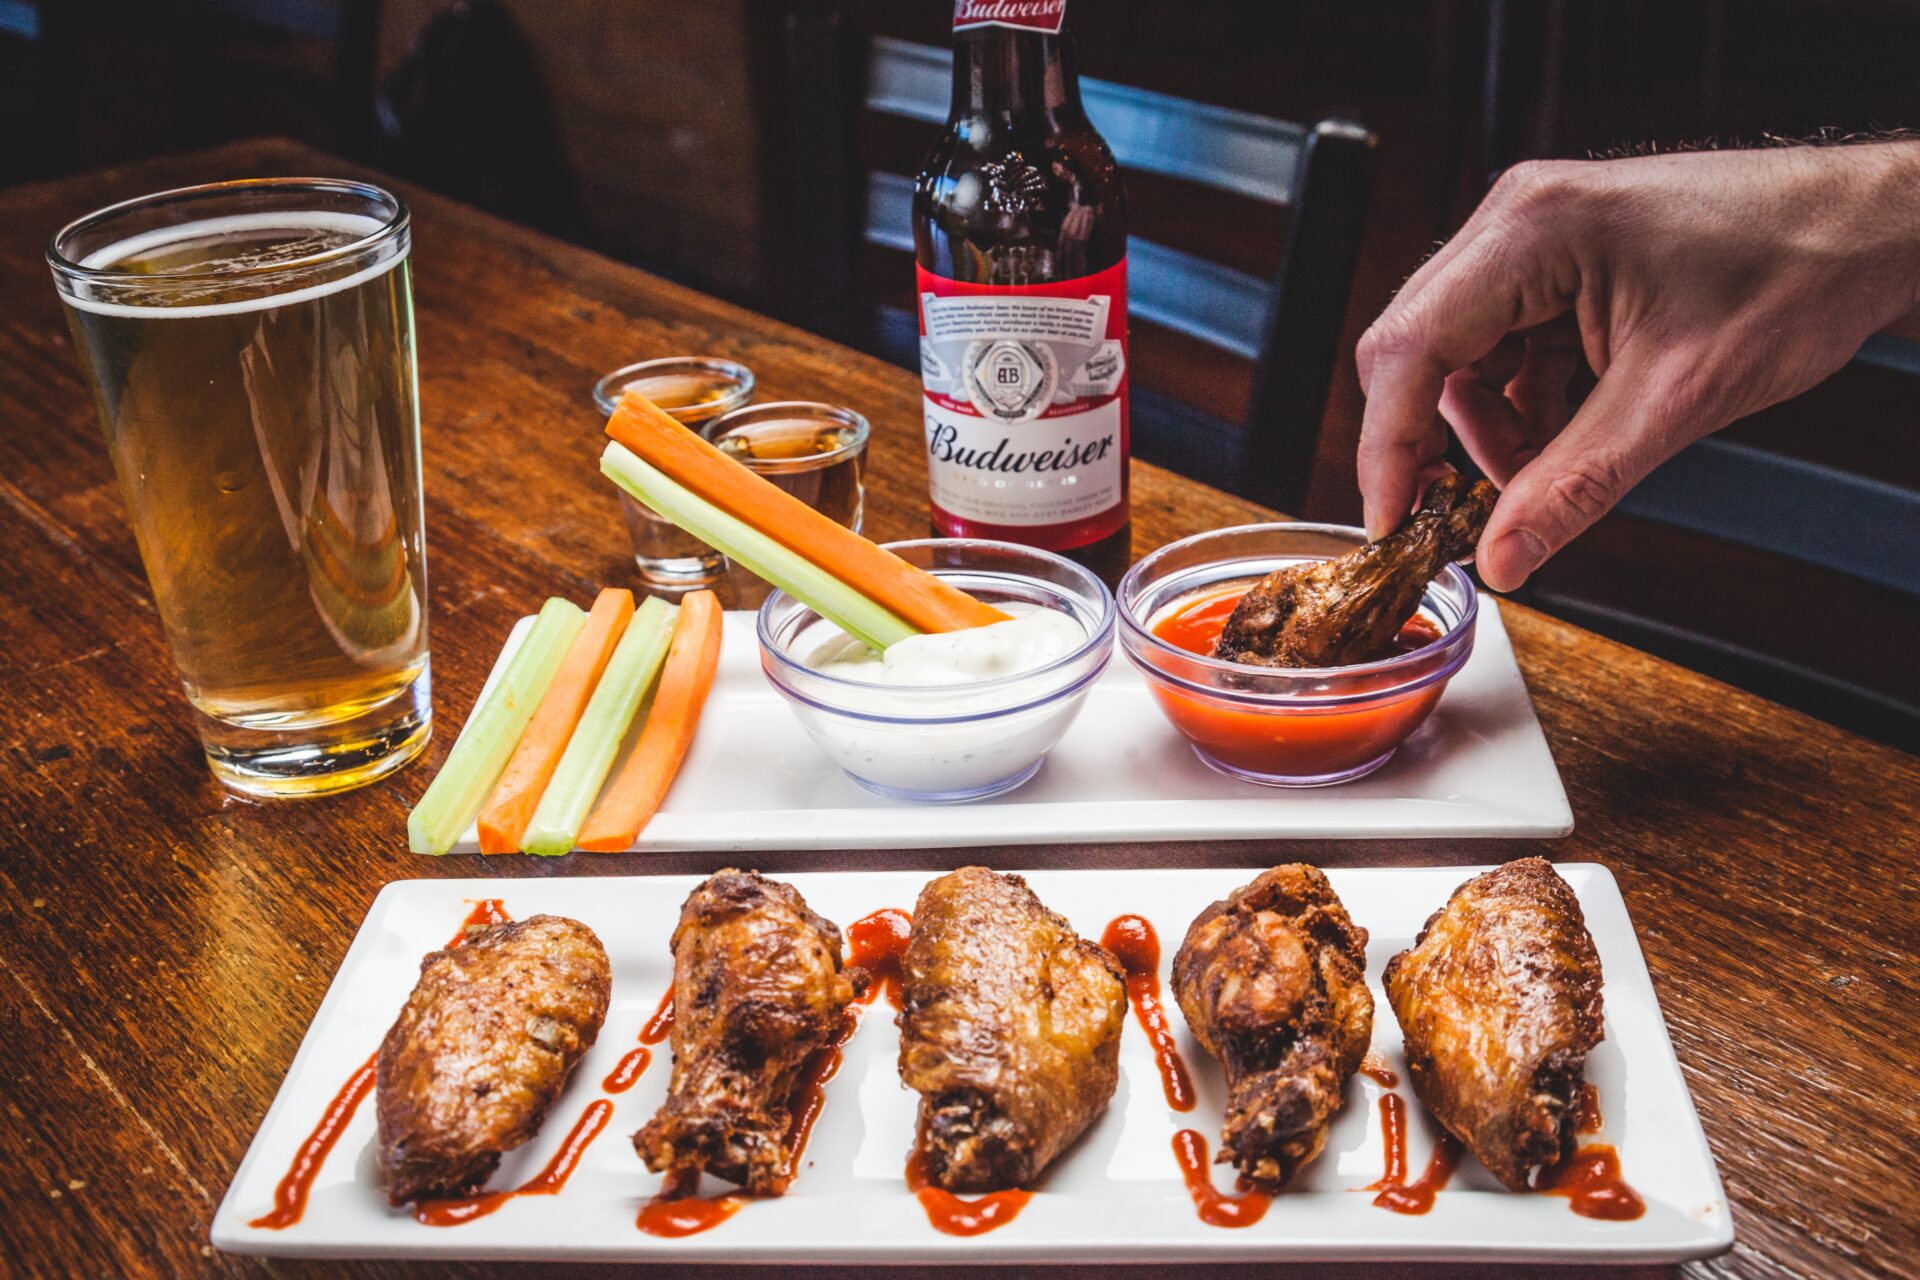 fried chicken and beer on the wooden table